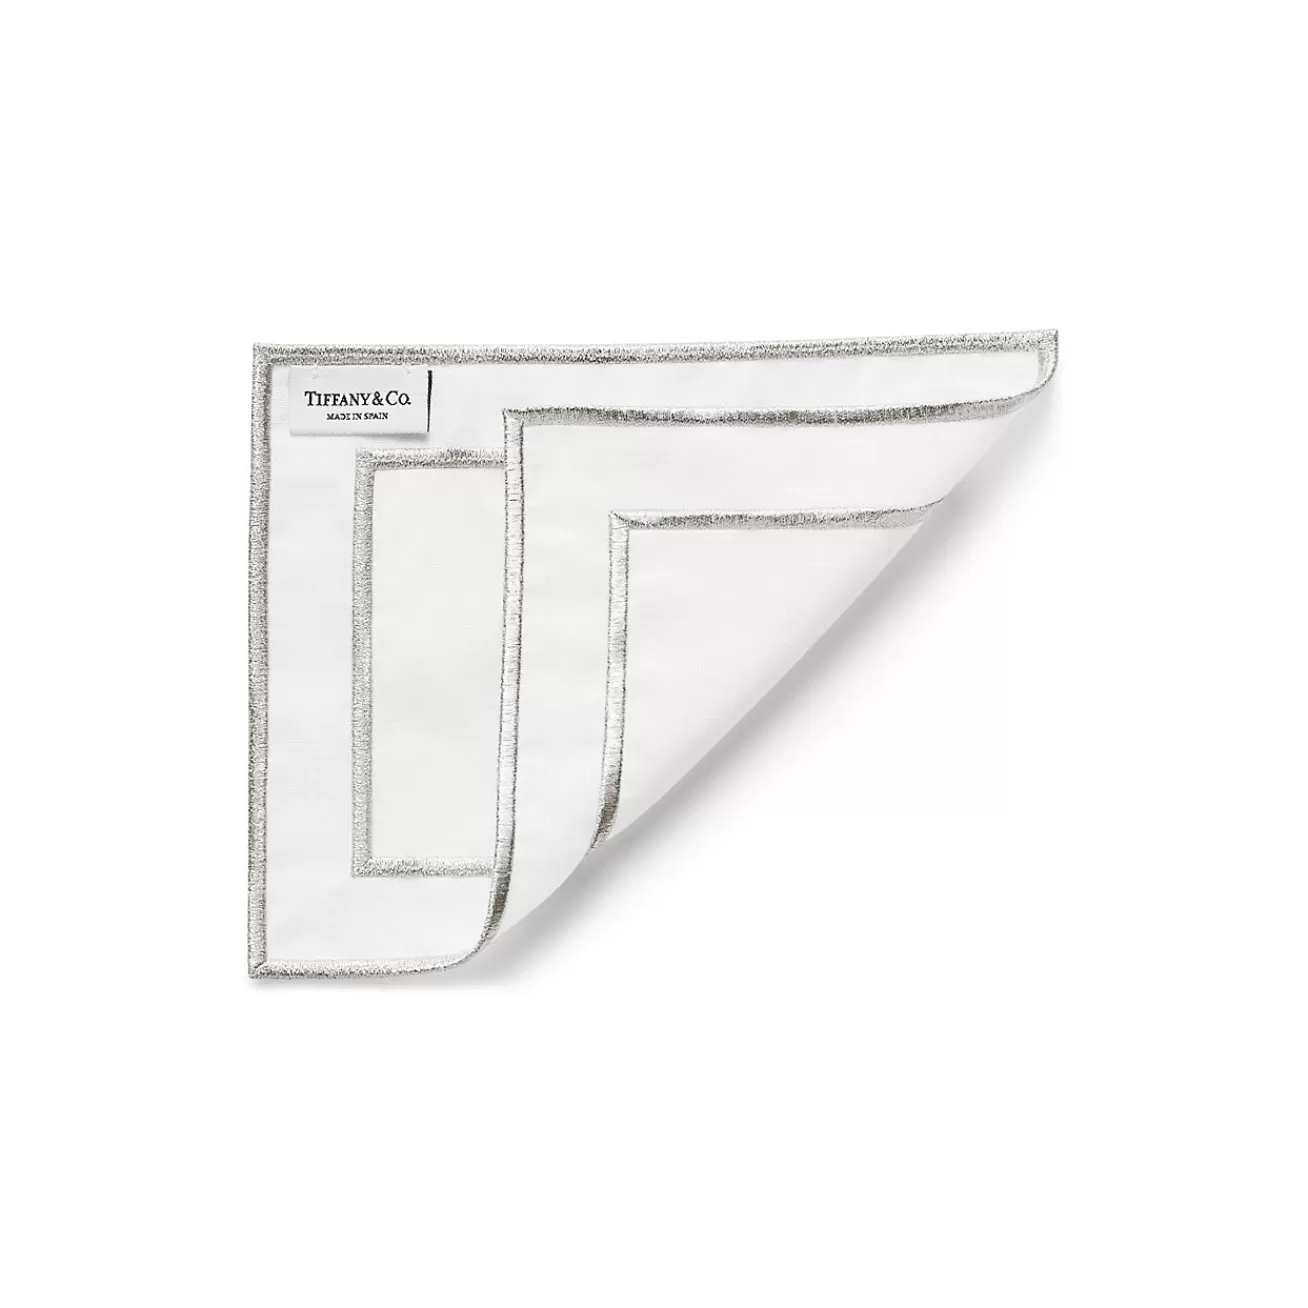 Tiffany & Co. Tiffany Home Essentials Embroidered Cocktail Napkins in Linen, Set of Four | ^ Decor | Table Linens